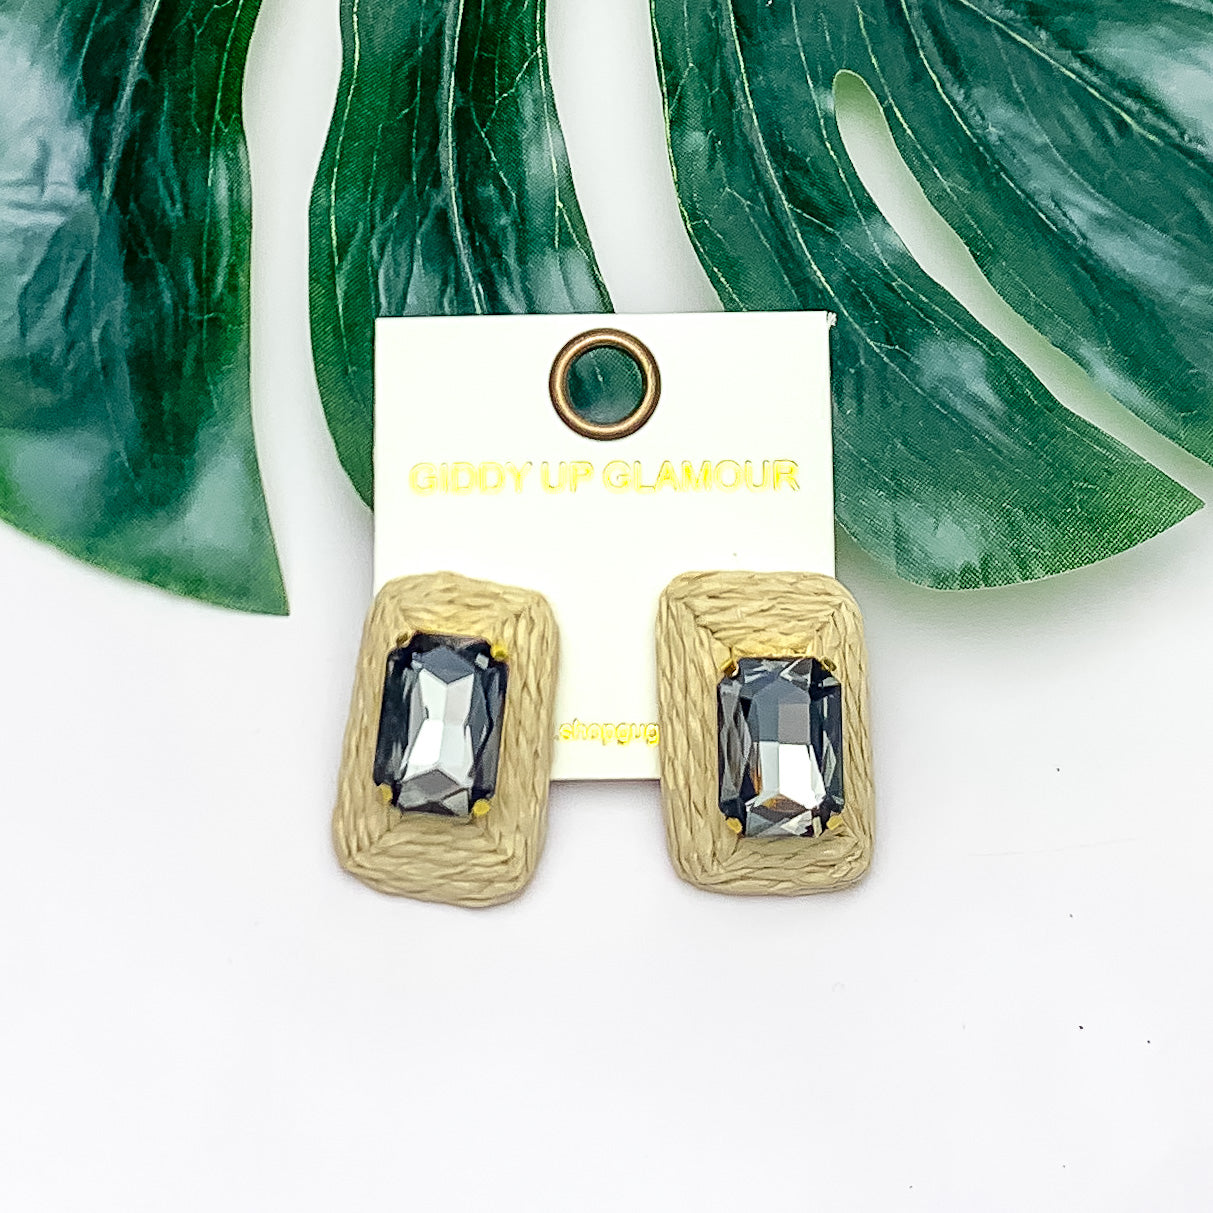 Truly Tropical Raffia Rectangle Earrings in Ivory With Grey Crystal. Pictured on a white background with the earrings laying on a large leaf.